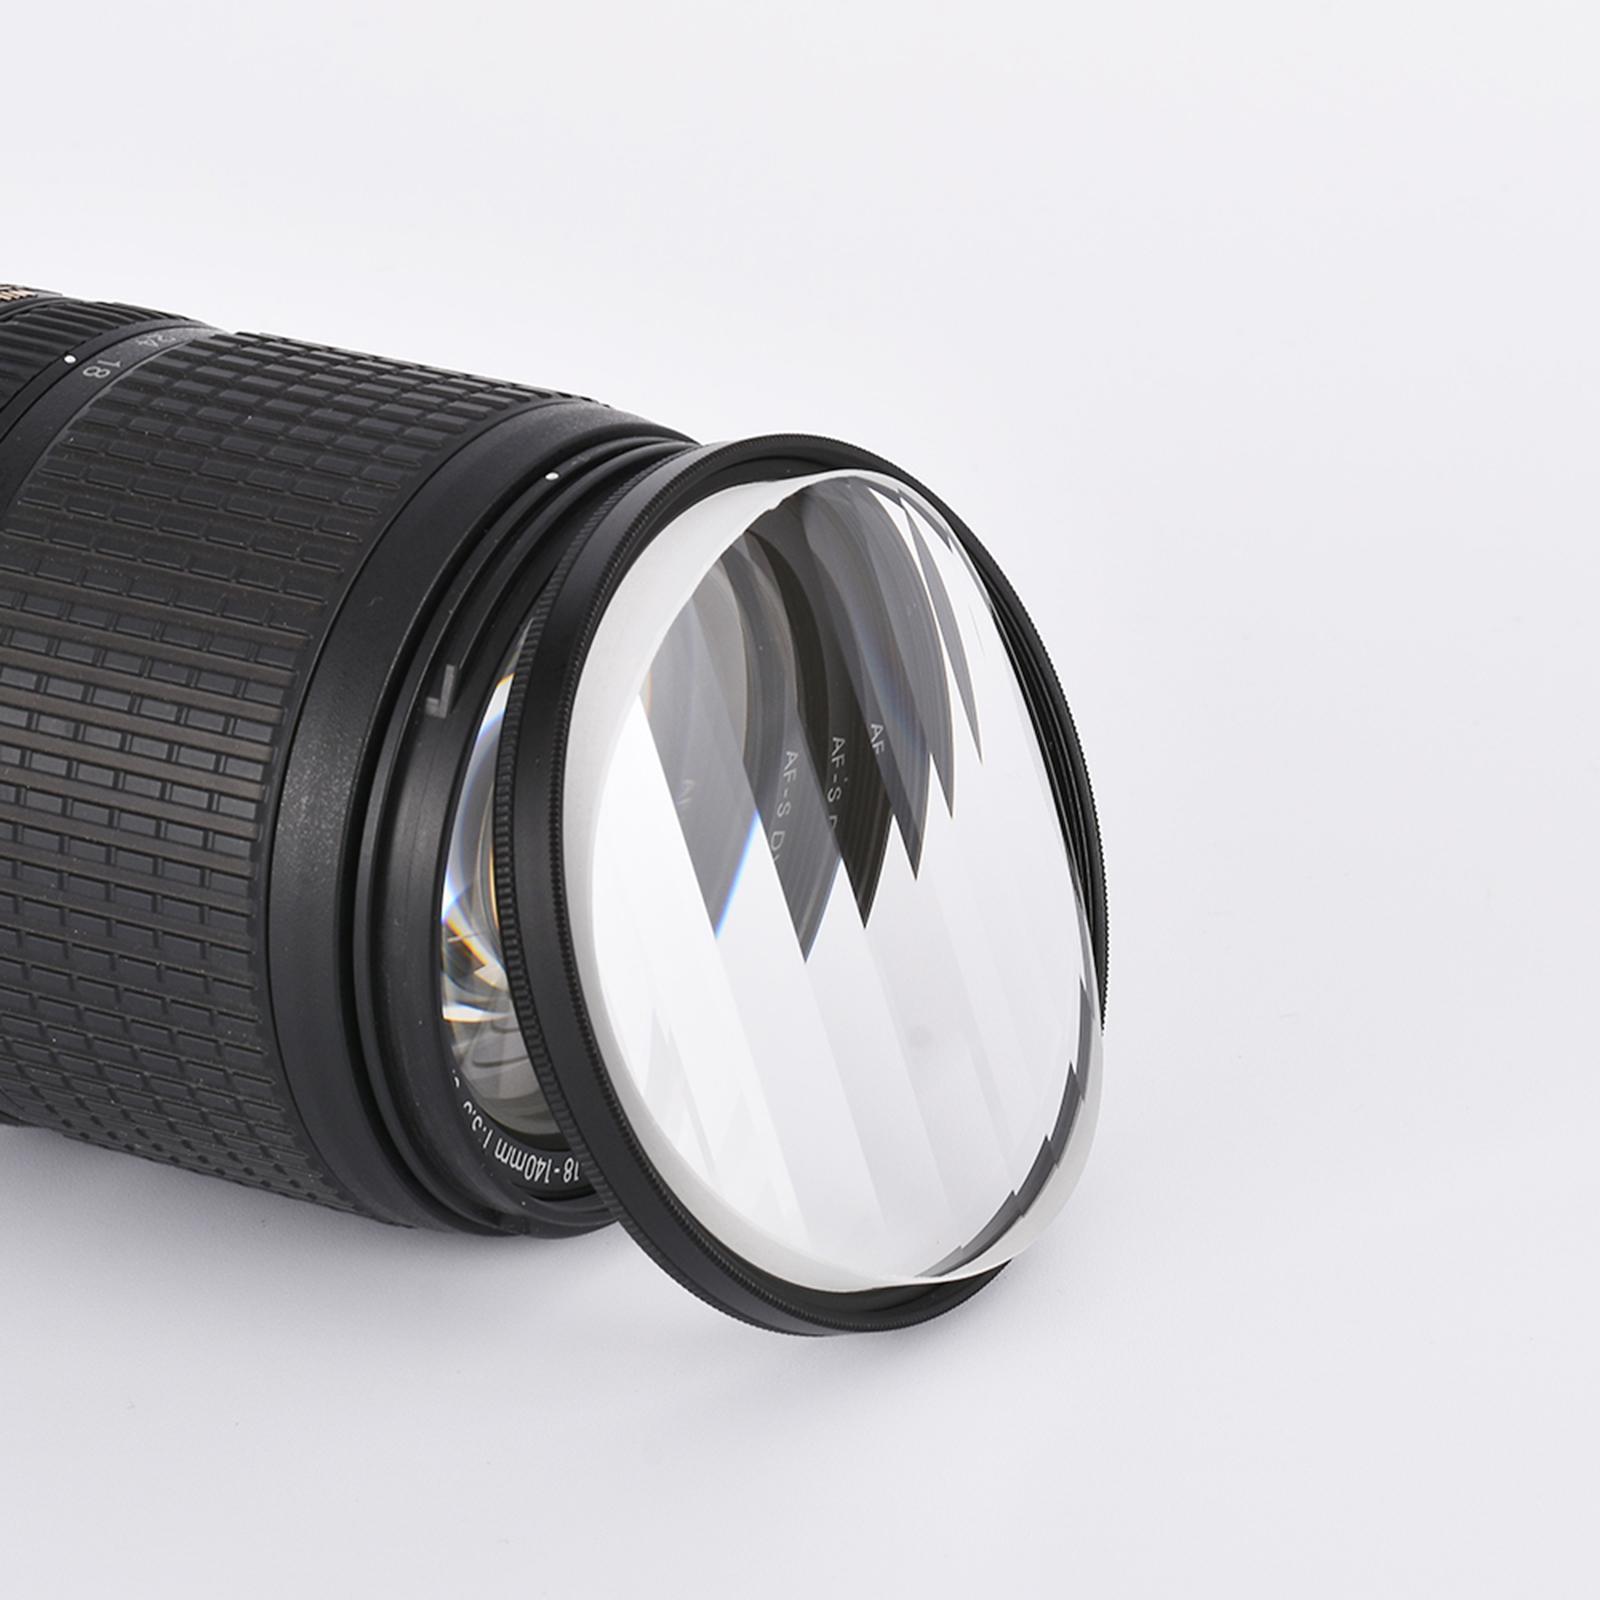 Camera Lens Filter Photography Accessories Achieve Glare Effect for Linear 77mm